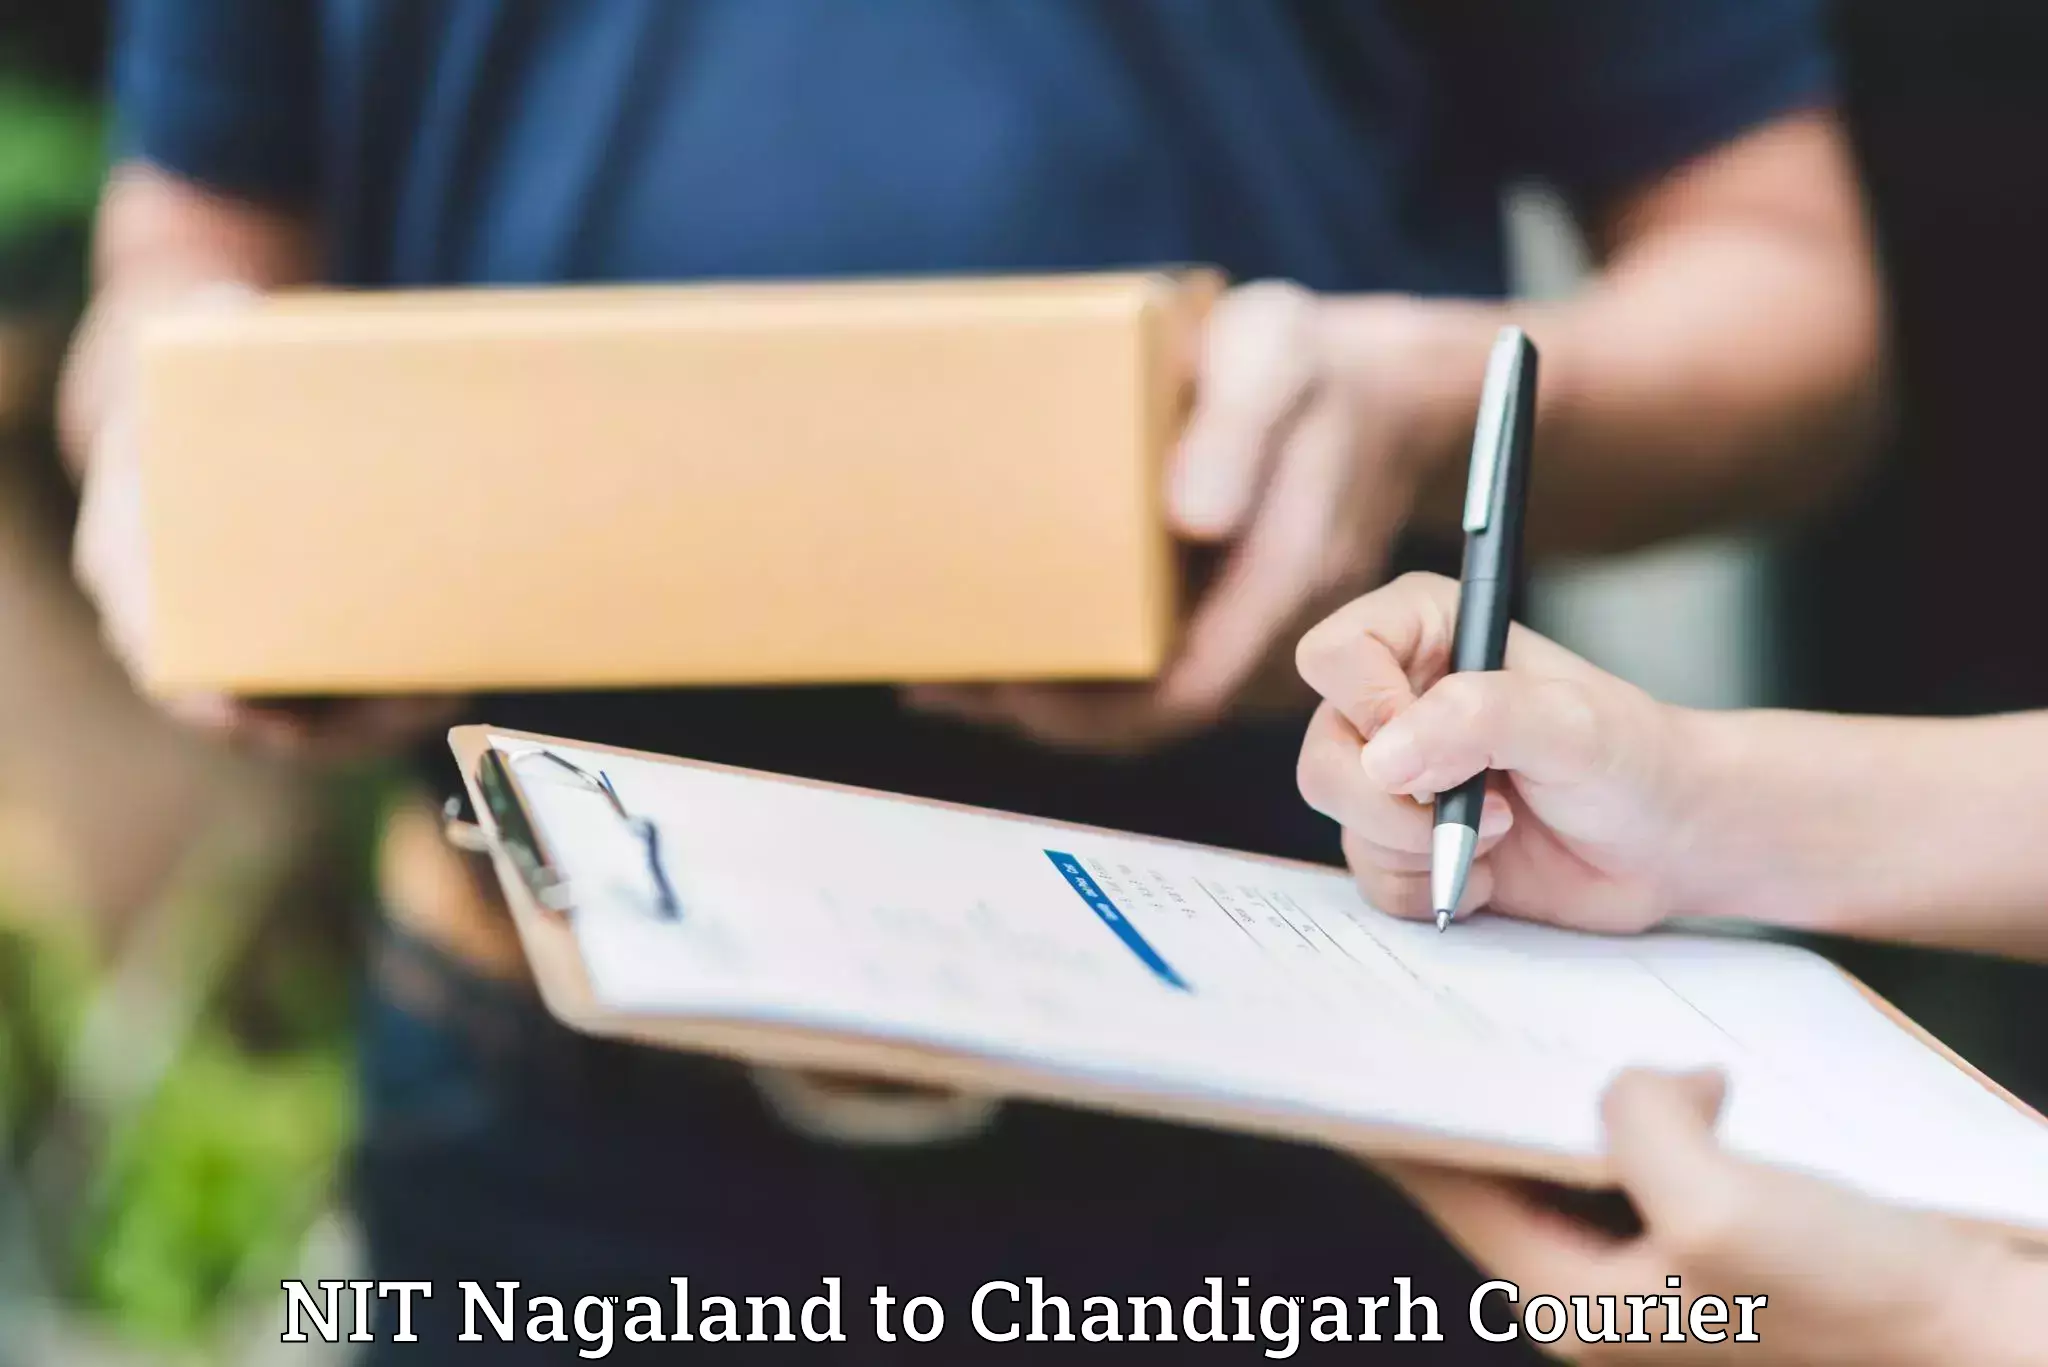 Efficient relocation services NIT Nagaland to Chandigarh